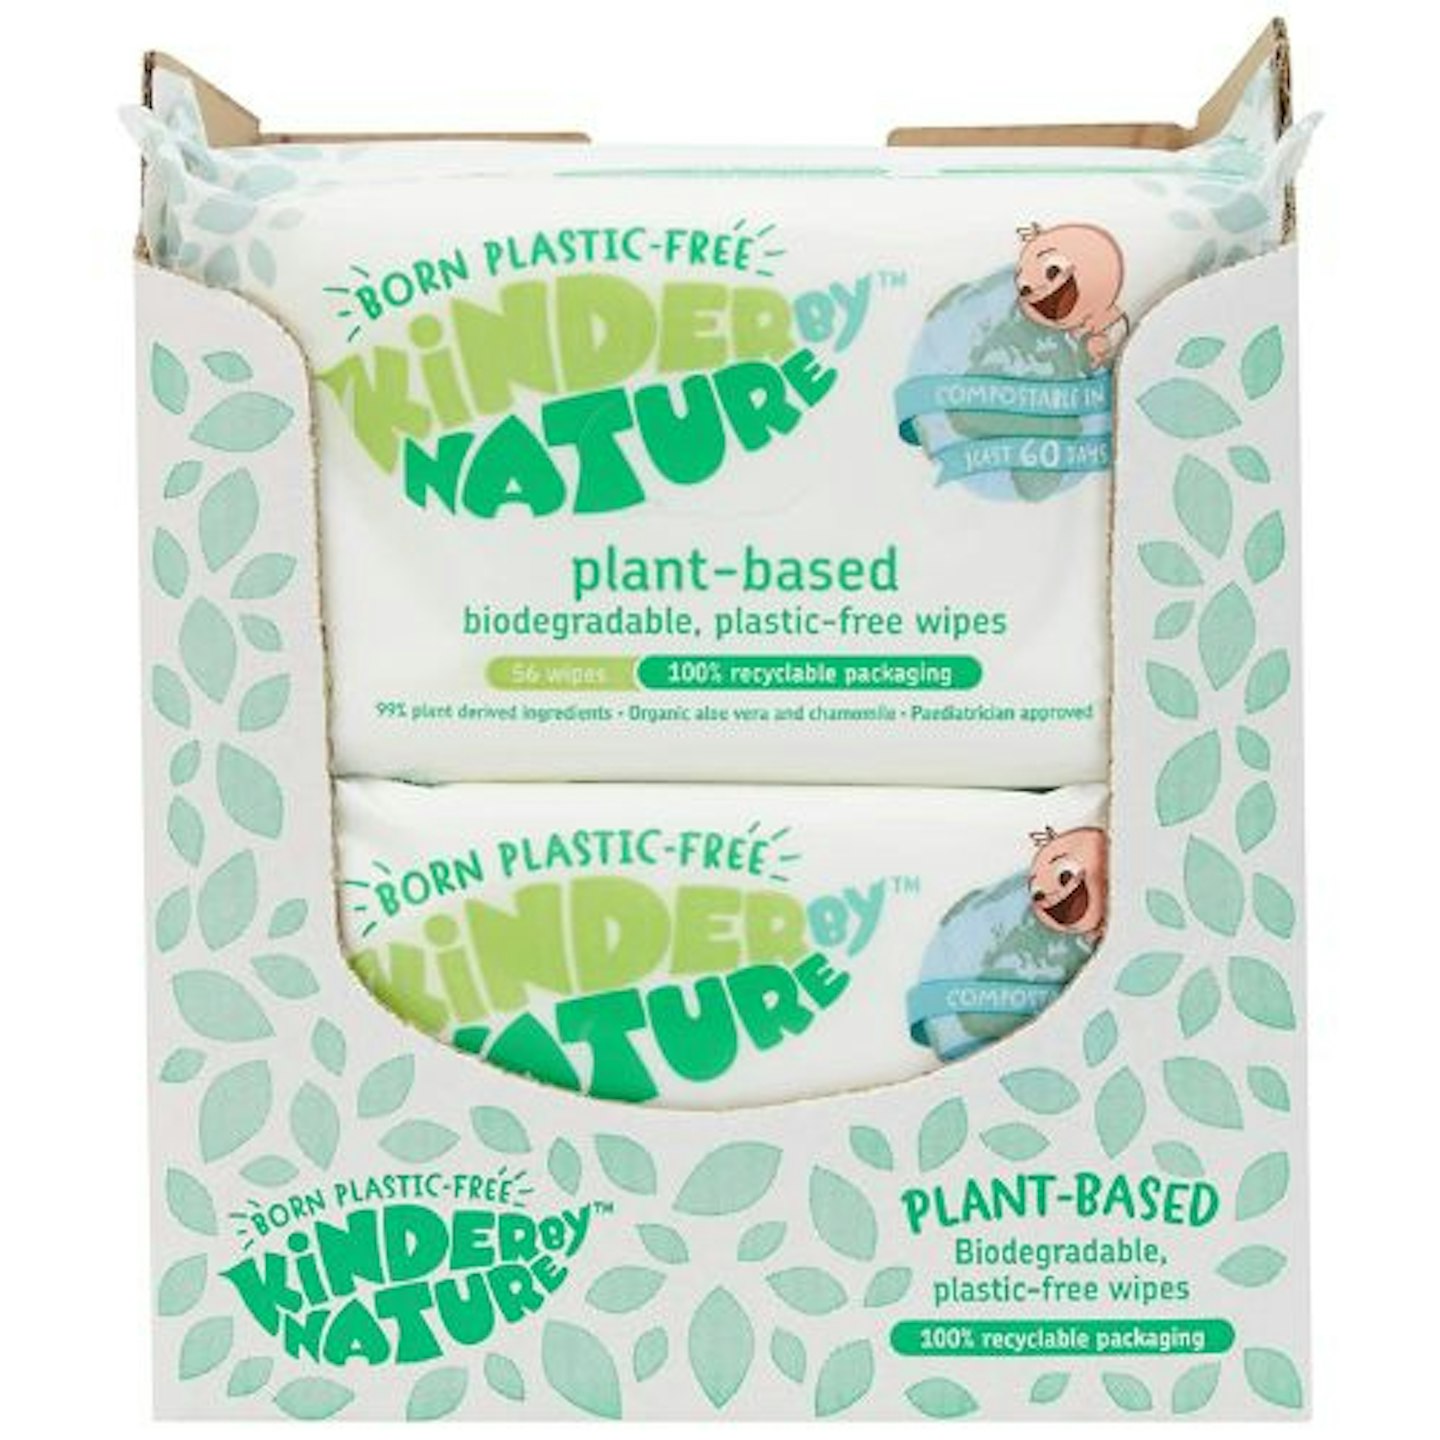 Jackson Reece, Kinder by Nature Plant-Based Wipes